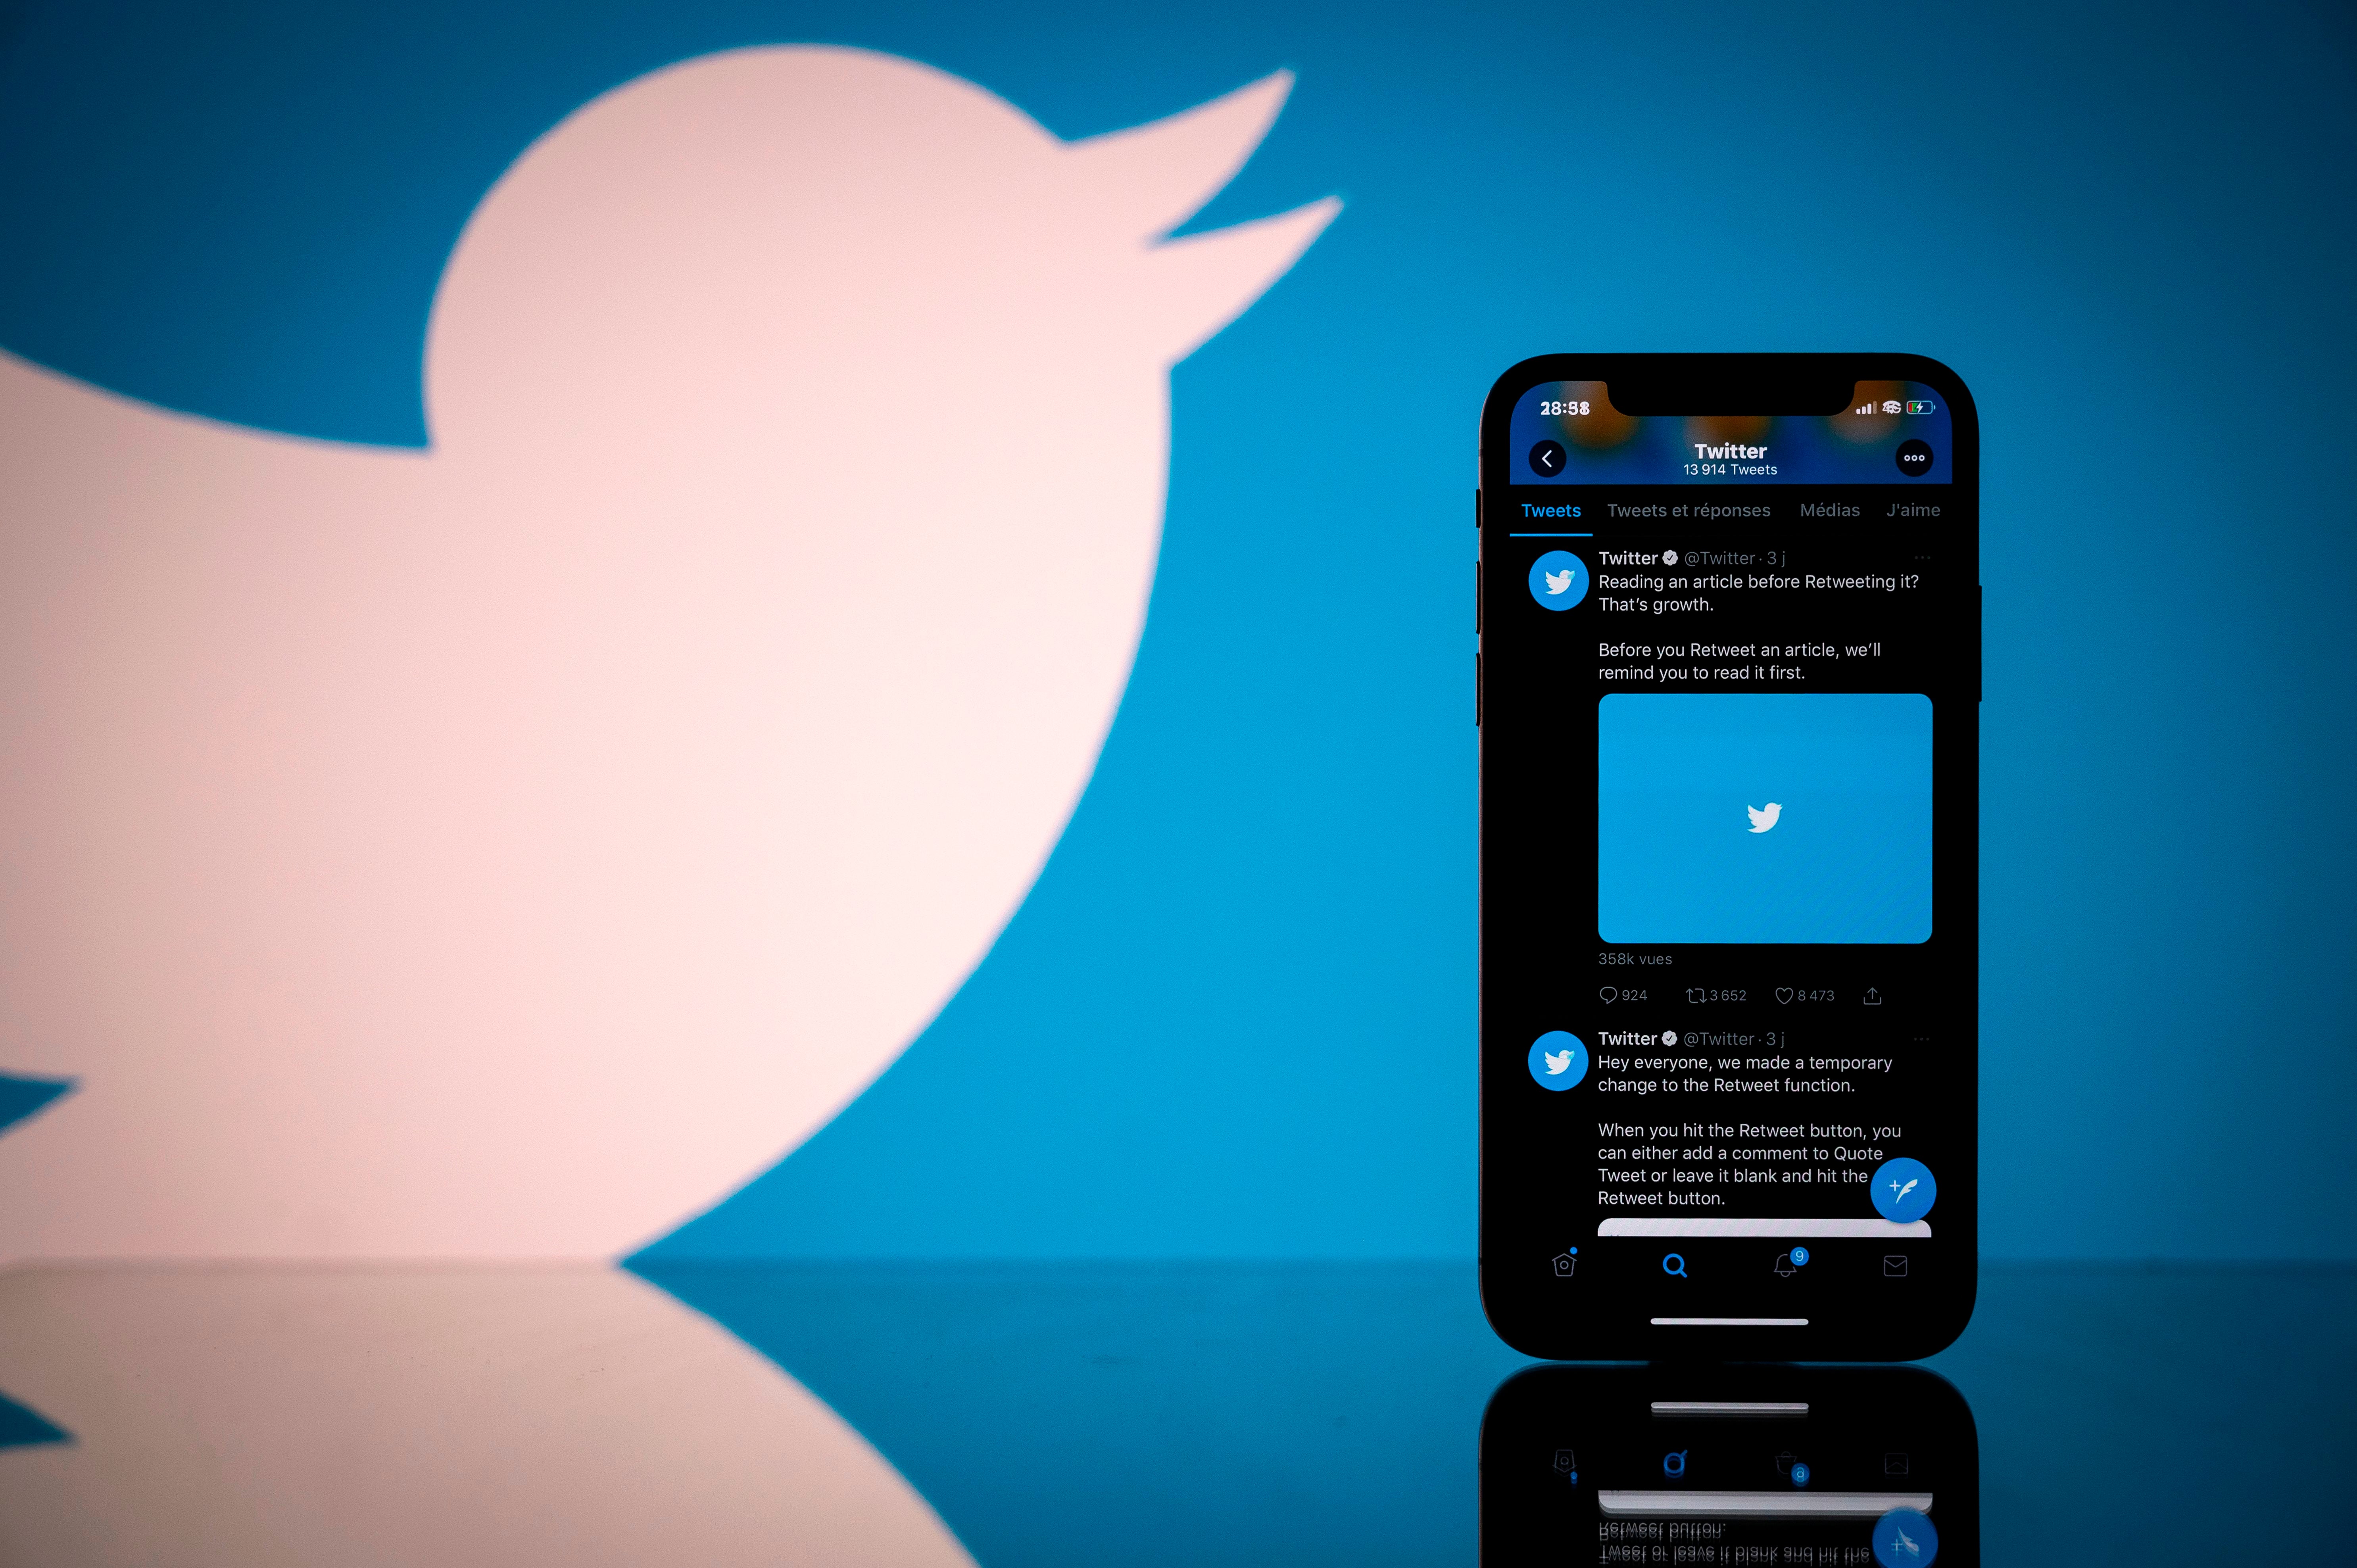 Twitter has not officially commented on what caused the brief outage of service